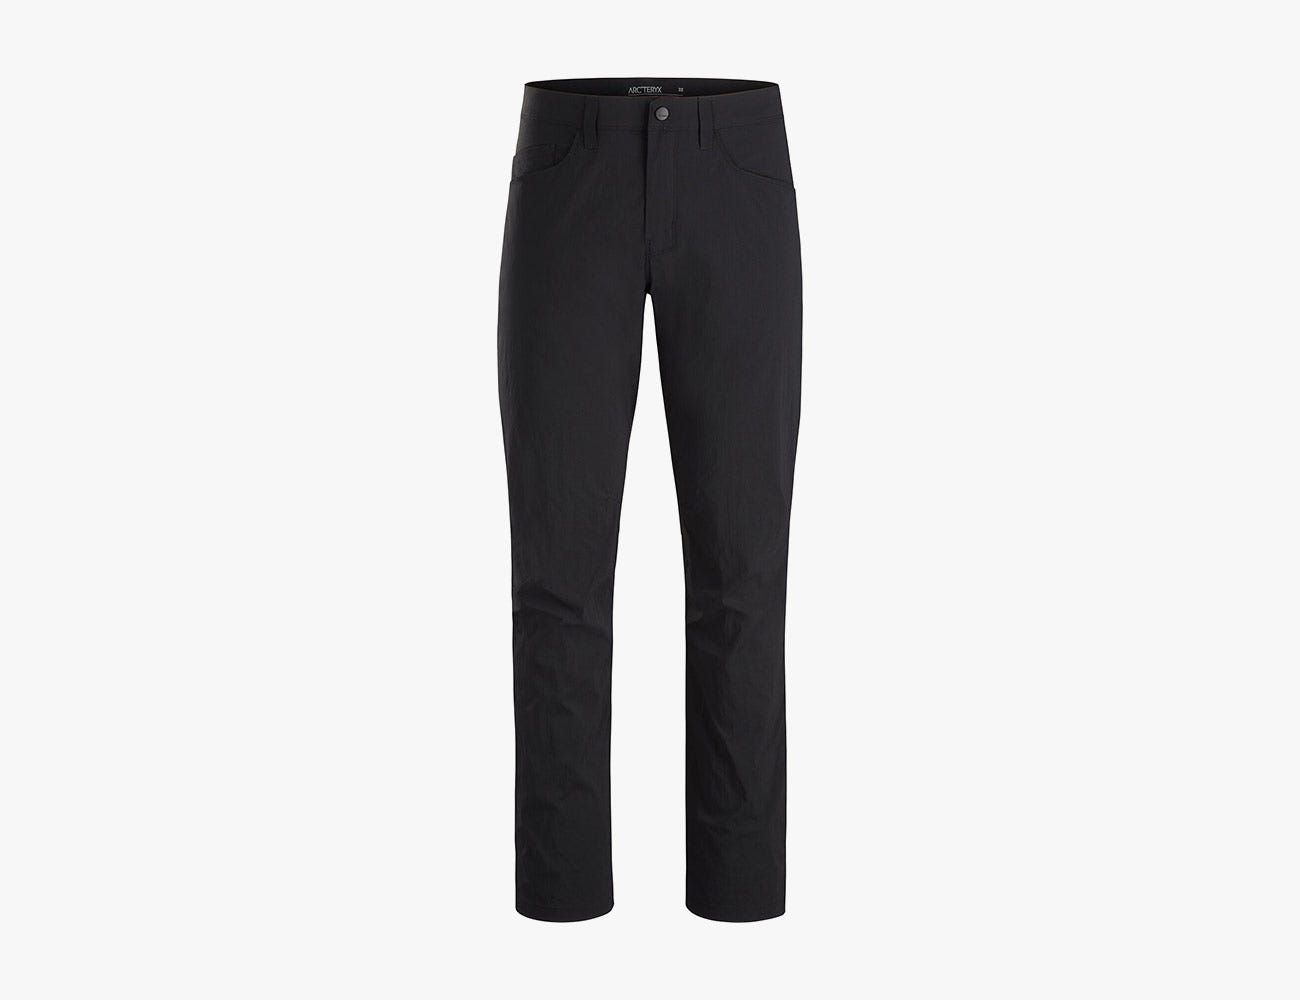 The Best Travel Pants for Your Next Trip